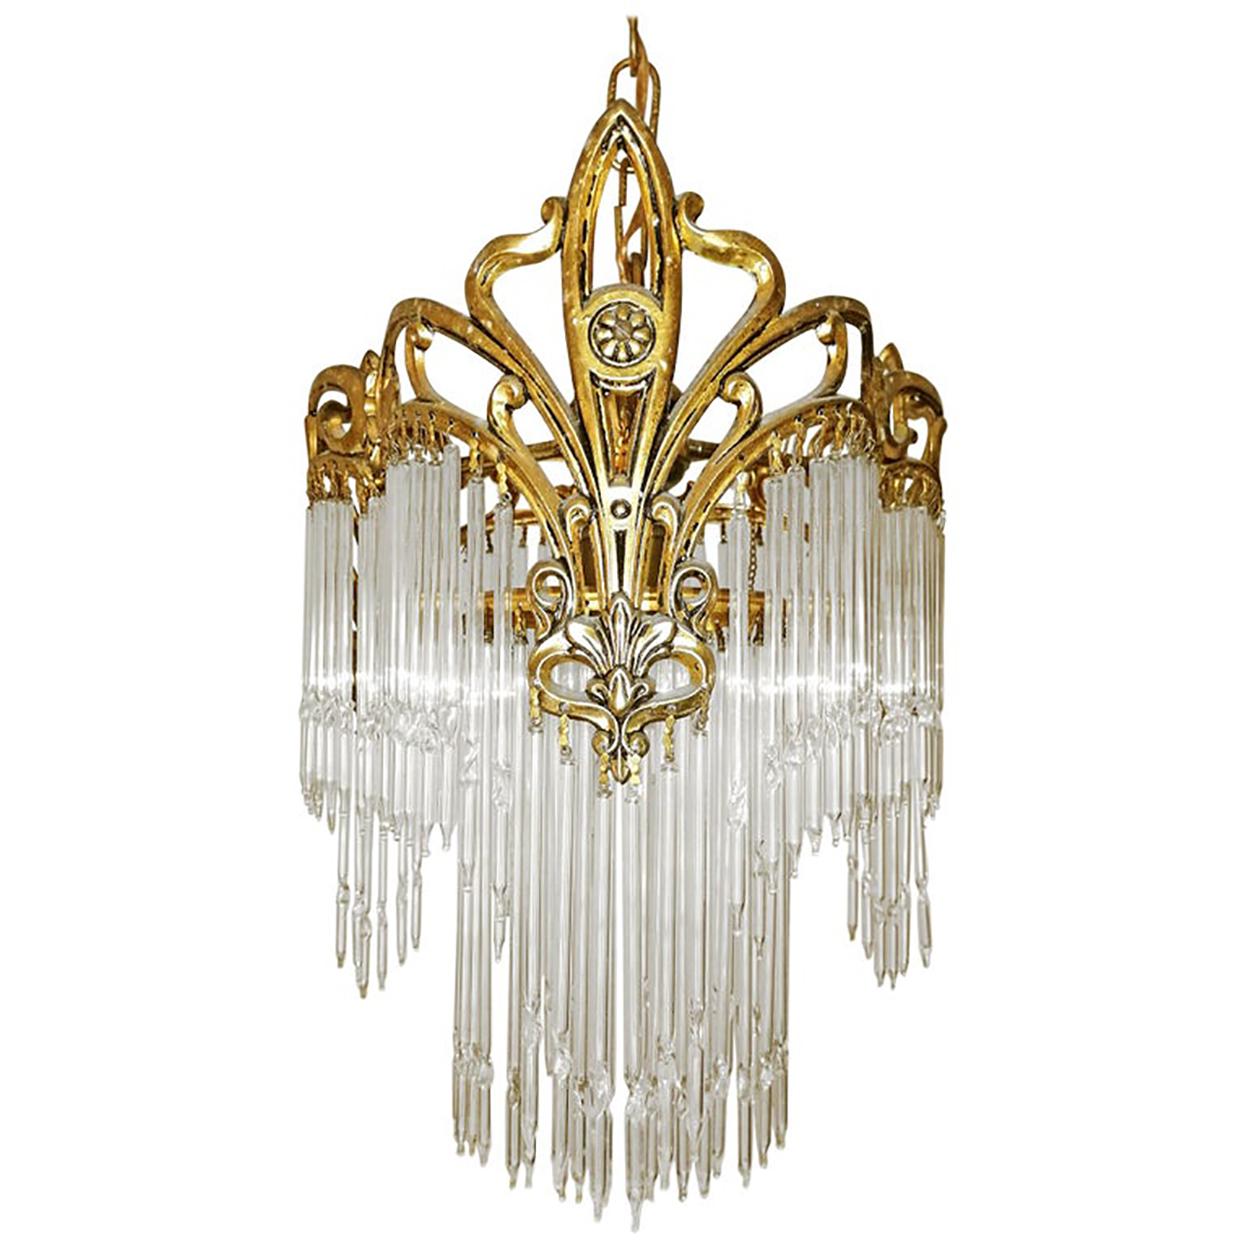 Beautiful antique French Art Nouveau or Art Deco gilt bronze lantern and clear art crystal straw fringe, 2 tiers.
Measures:
Diameter 11.8 in /30 cm
Height 41.3 in (chain=21.6 in) / 105 cm (chain= 55 cm)
Weight 4 Kg / 9 lb
1-light bulbs E-27/